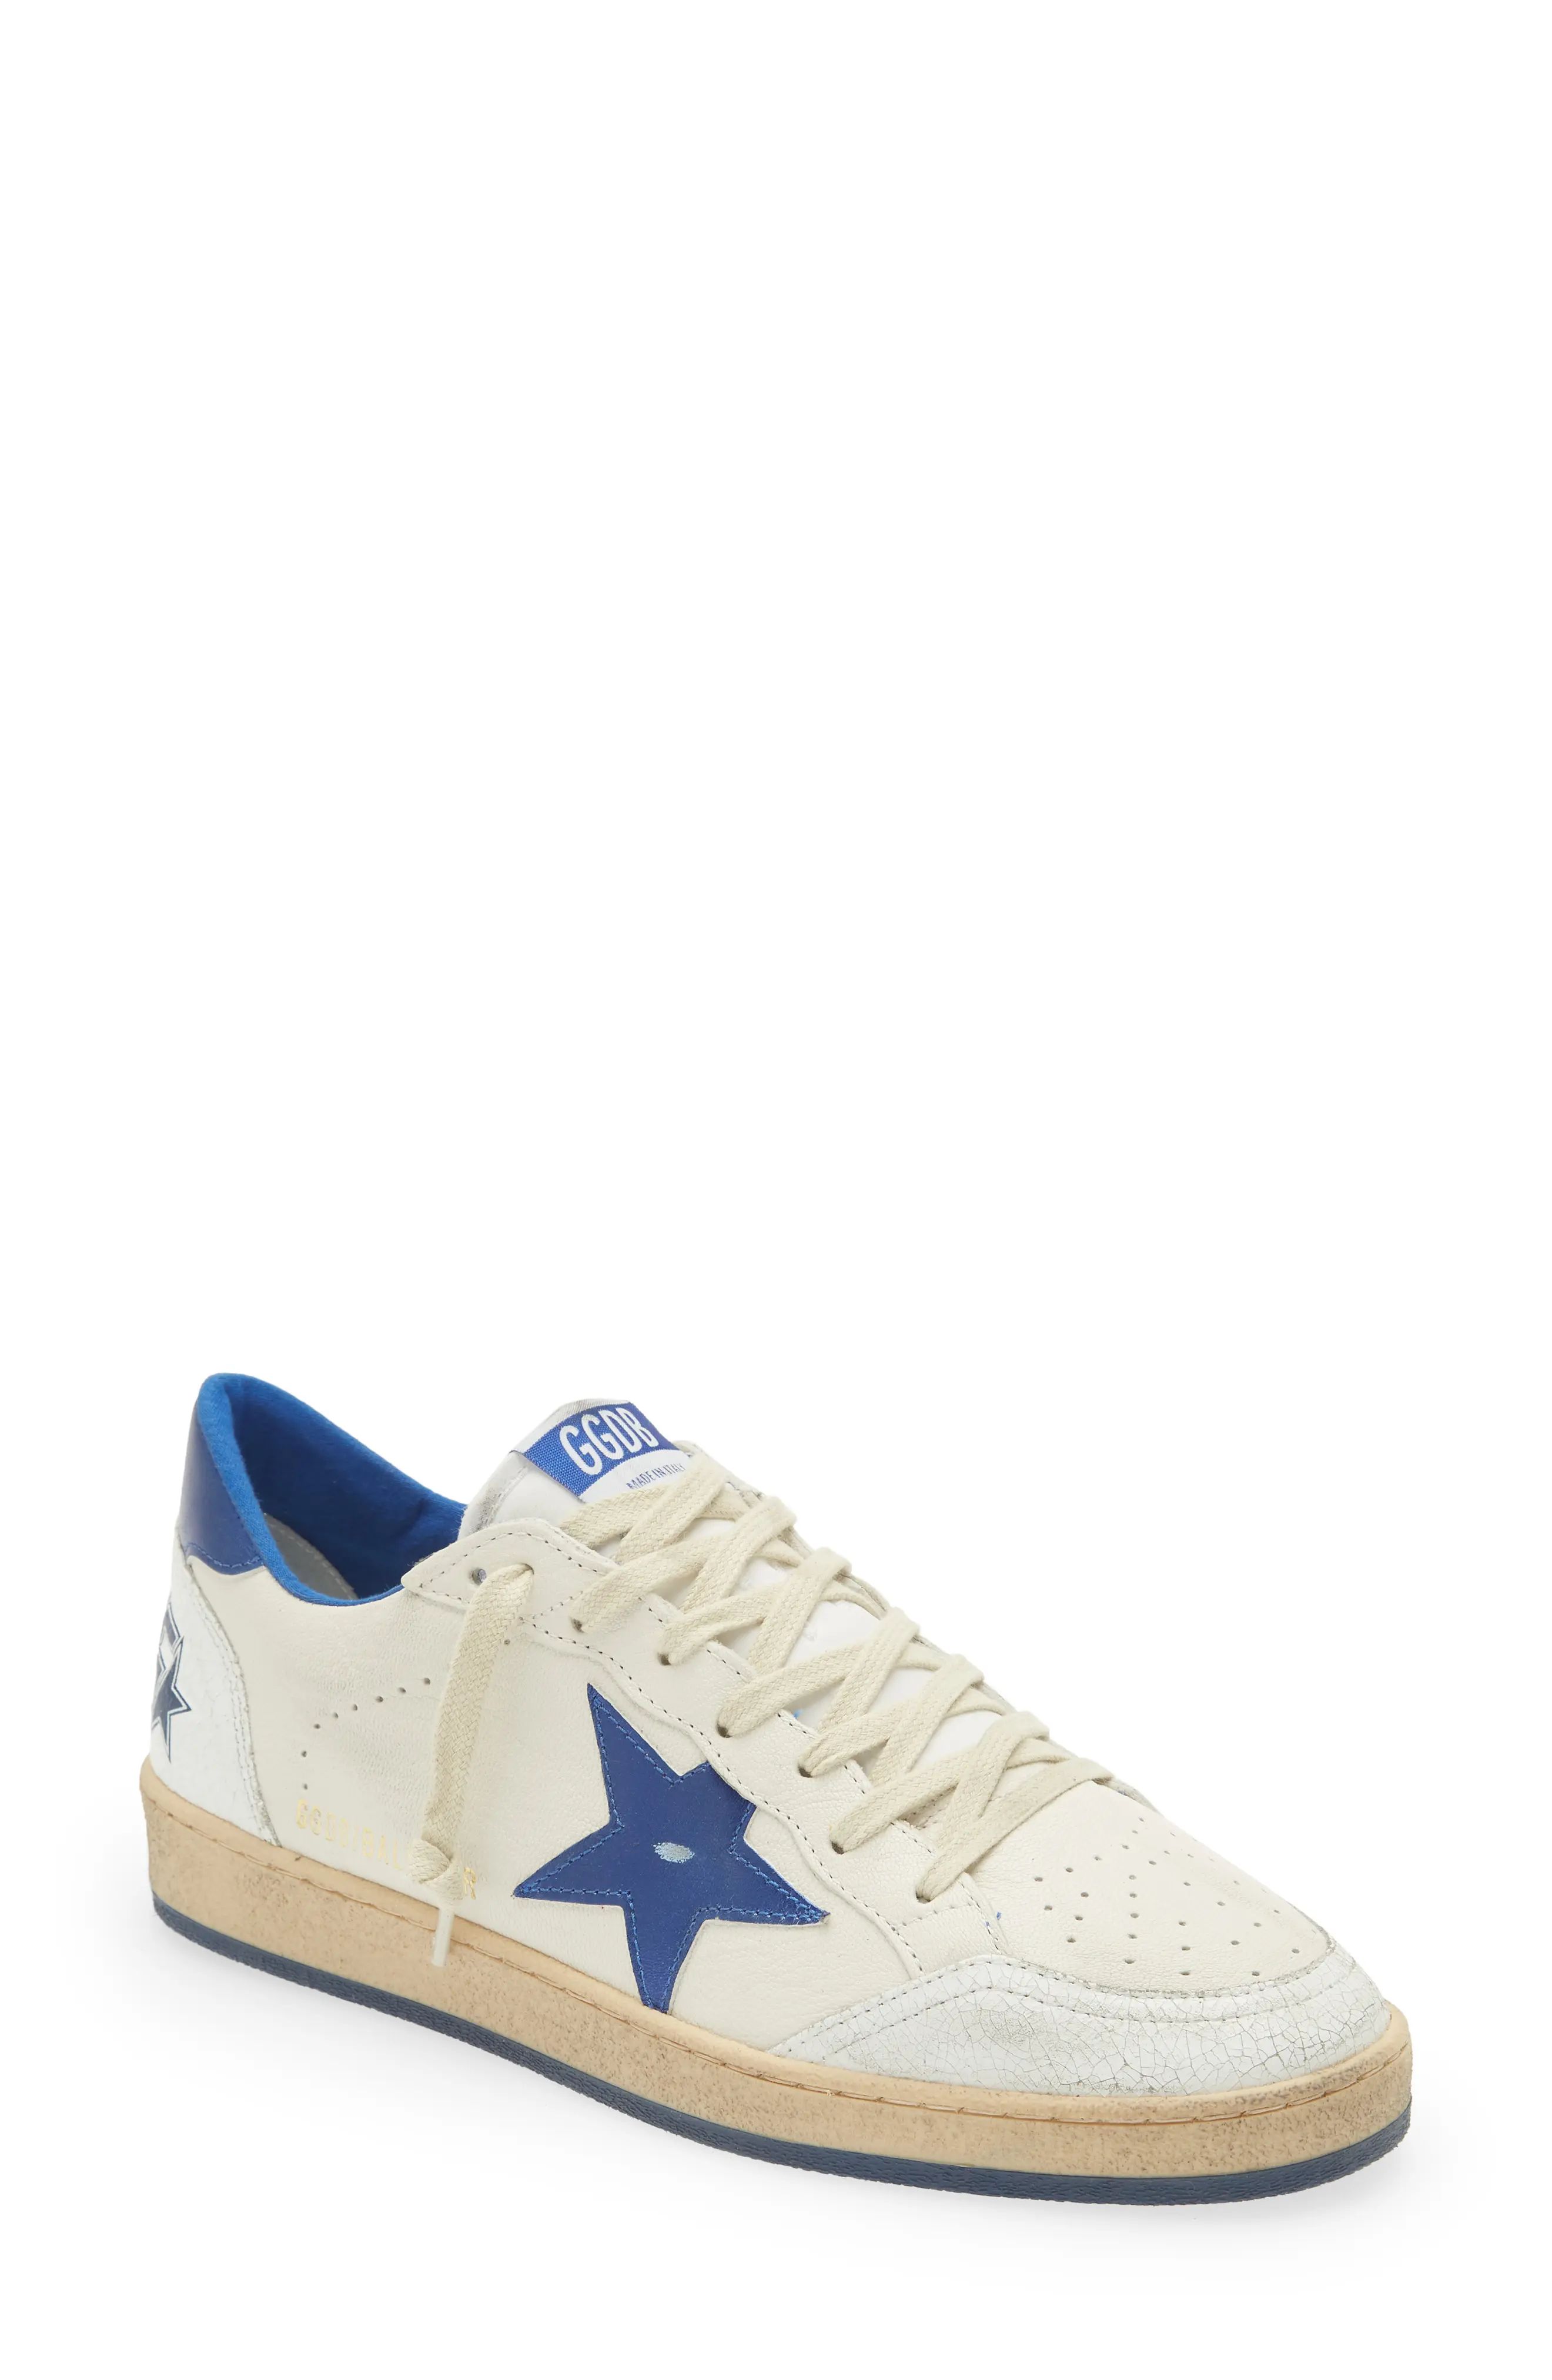 Golden Goose Ball Star Low Top Sneaker in White/Bluette at Nordstrom, Size 9Us | Nordstrom